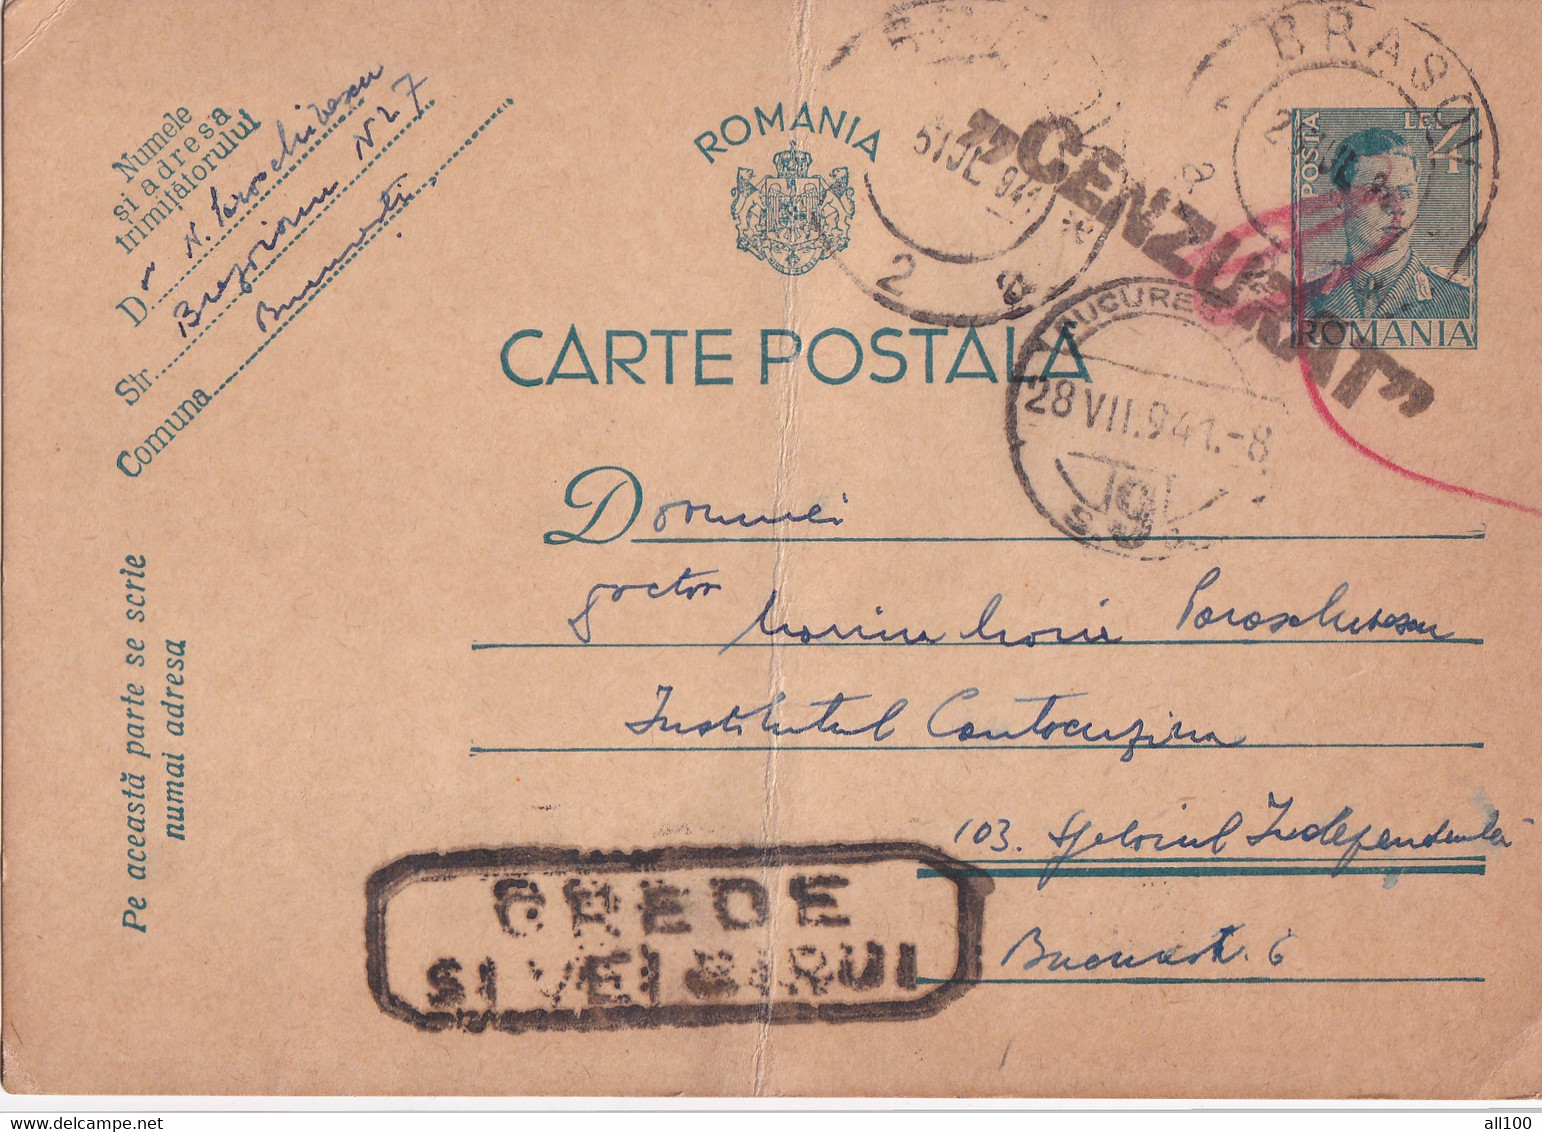 A16458 - MILITARY LETTER ROMANIA POSTAL STATIONERY CENZORED BRASOV  CREDE SI VEI BIRUI STAMPEL  KING MICHAEL 4 LEI 1941 - 2. Weltkrieg (Briefe)